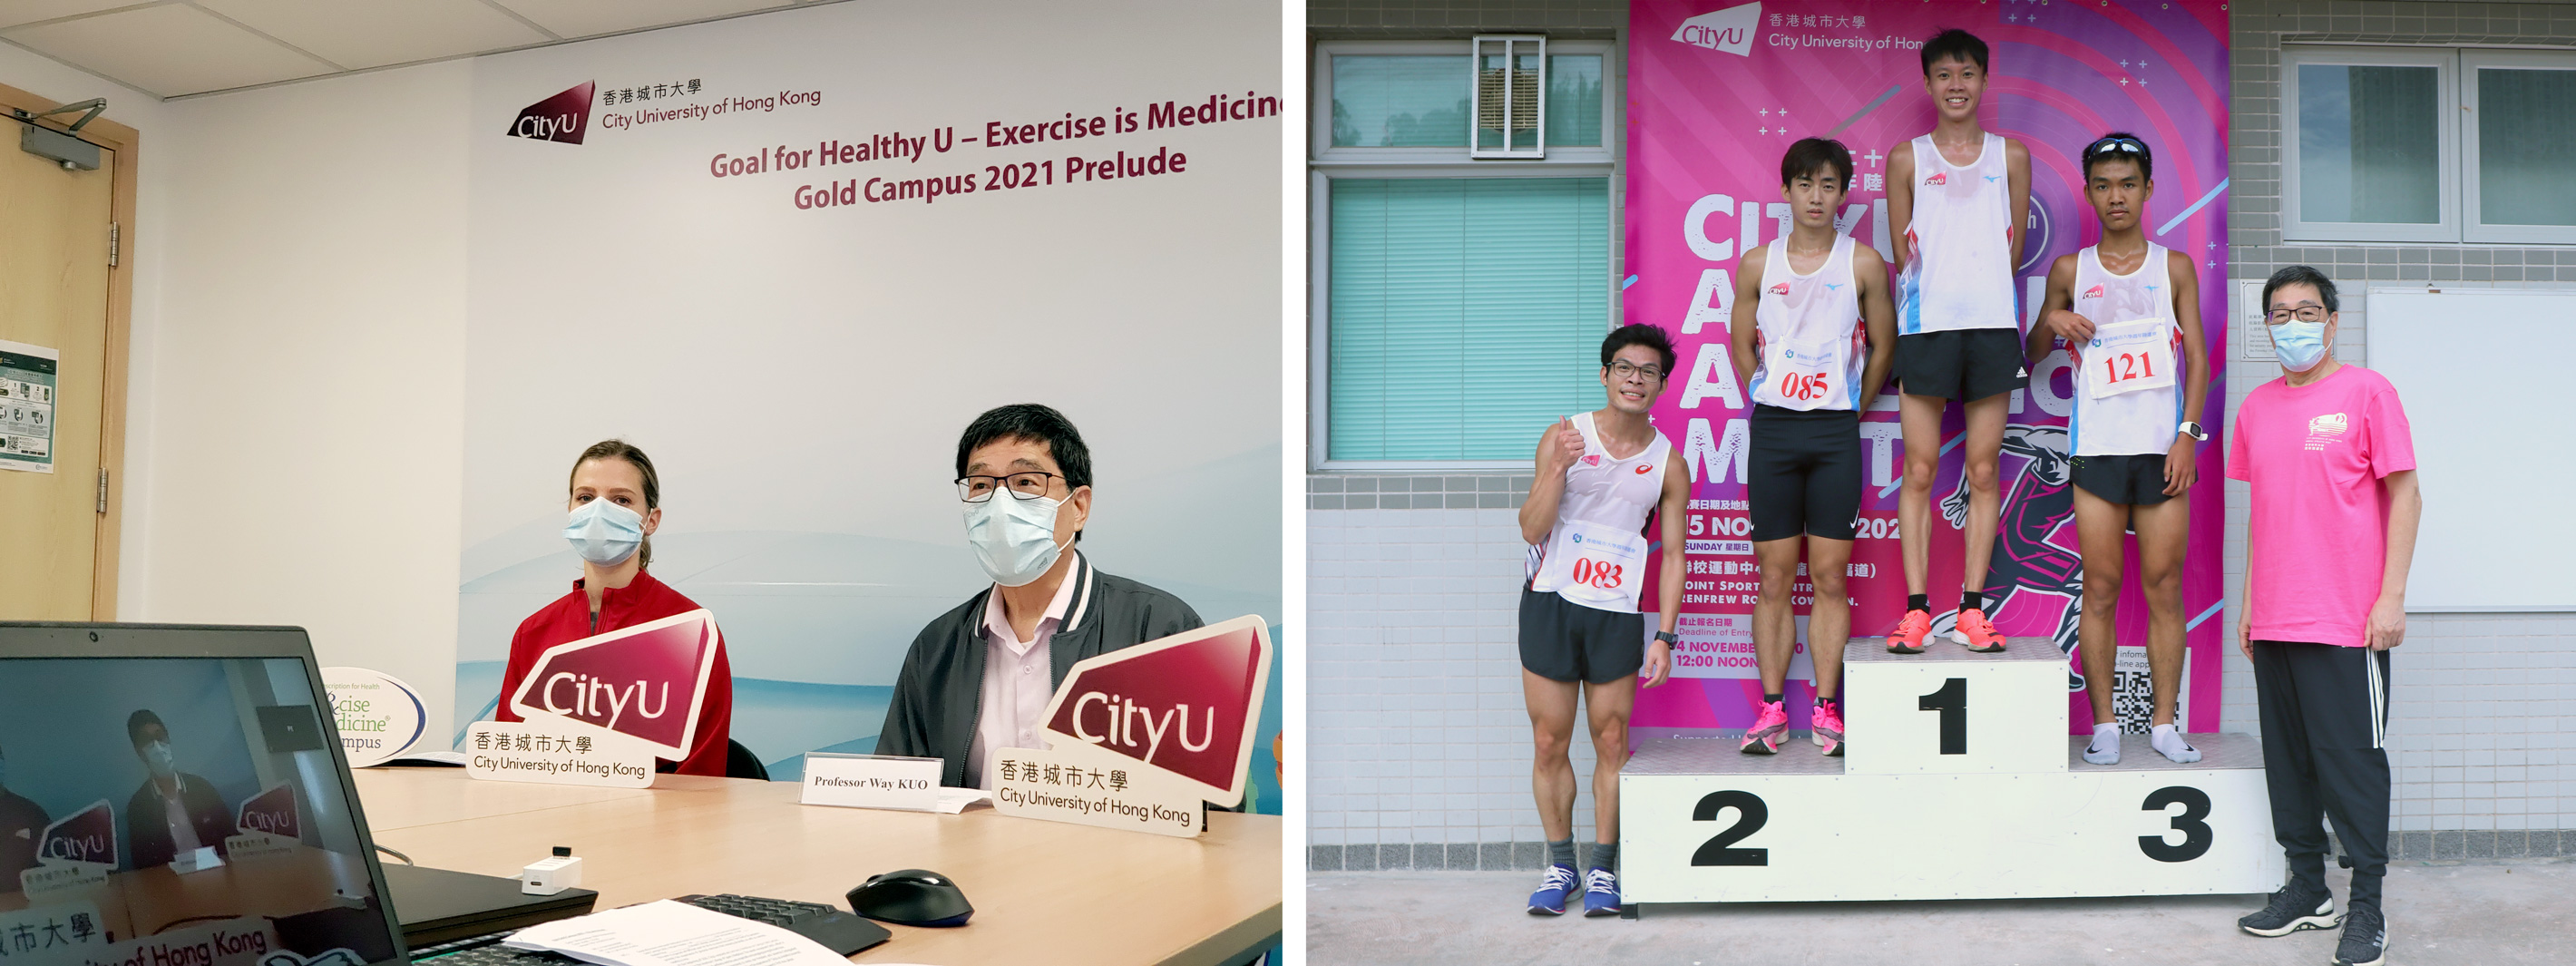 President Kuo attends the EIM Gold Campus 2021 Virtual Prelude (photo on the left). Supporting CityU athletes.